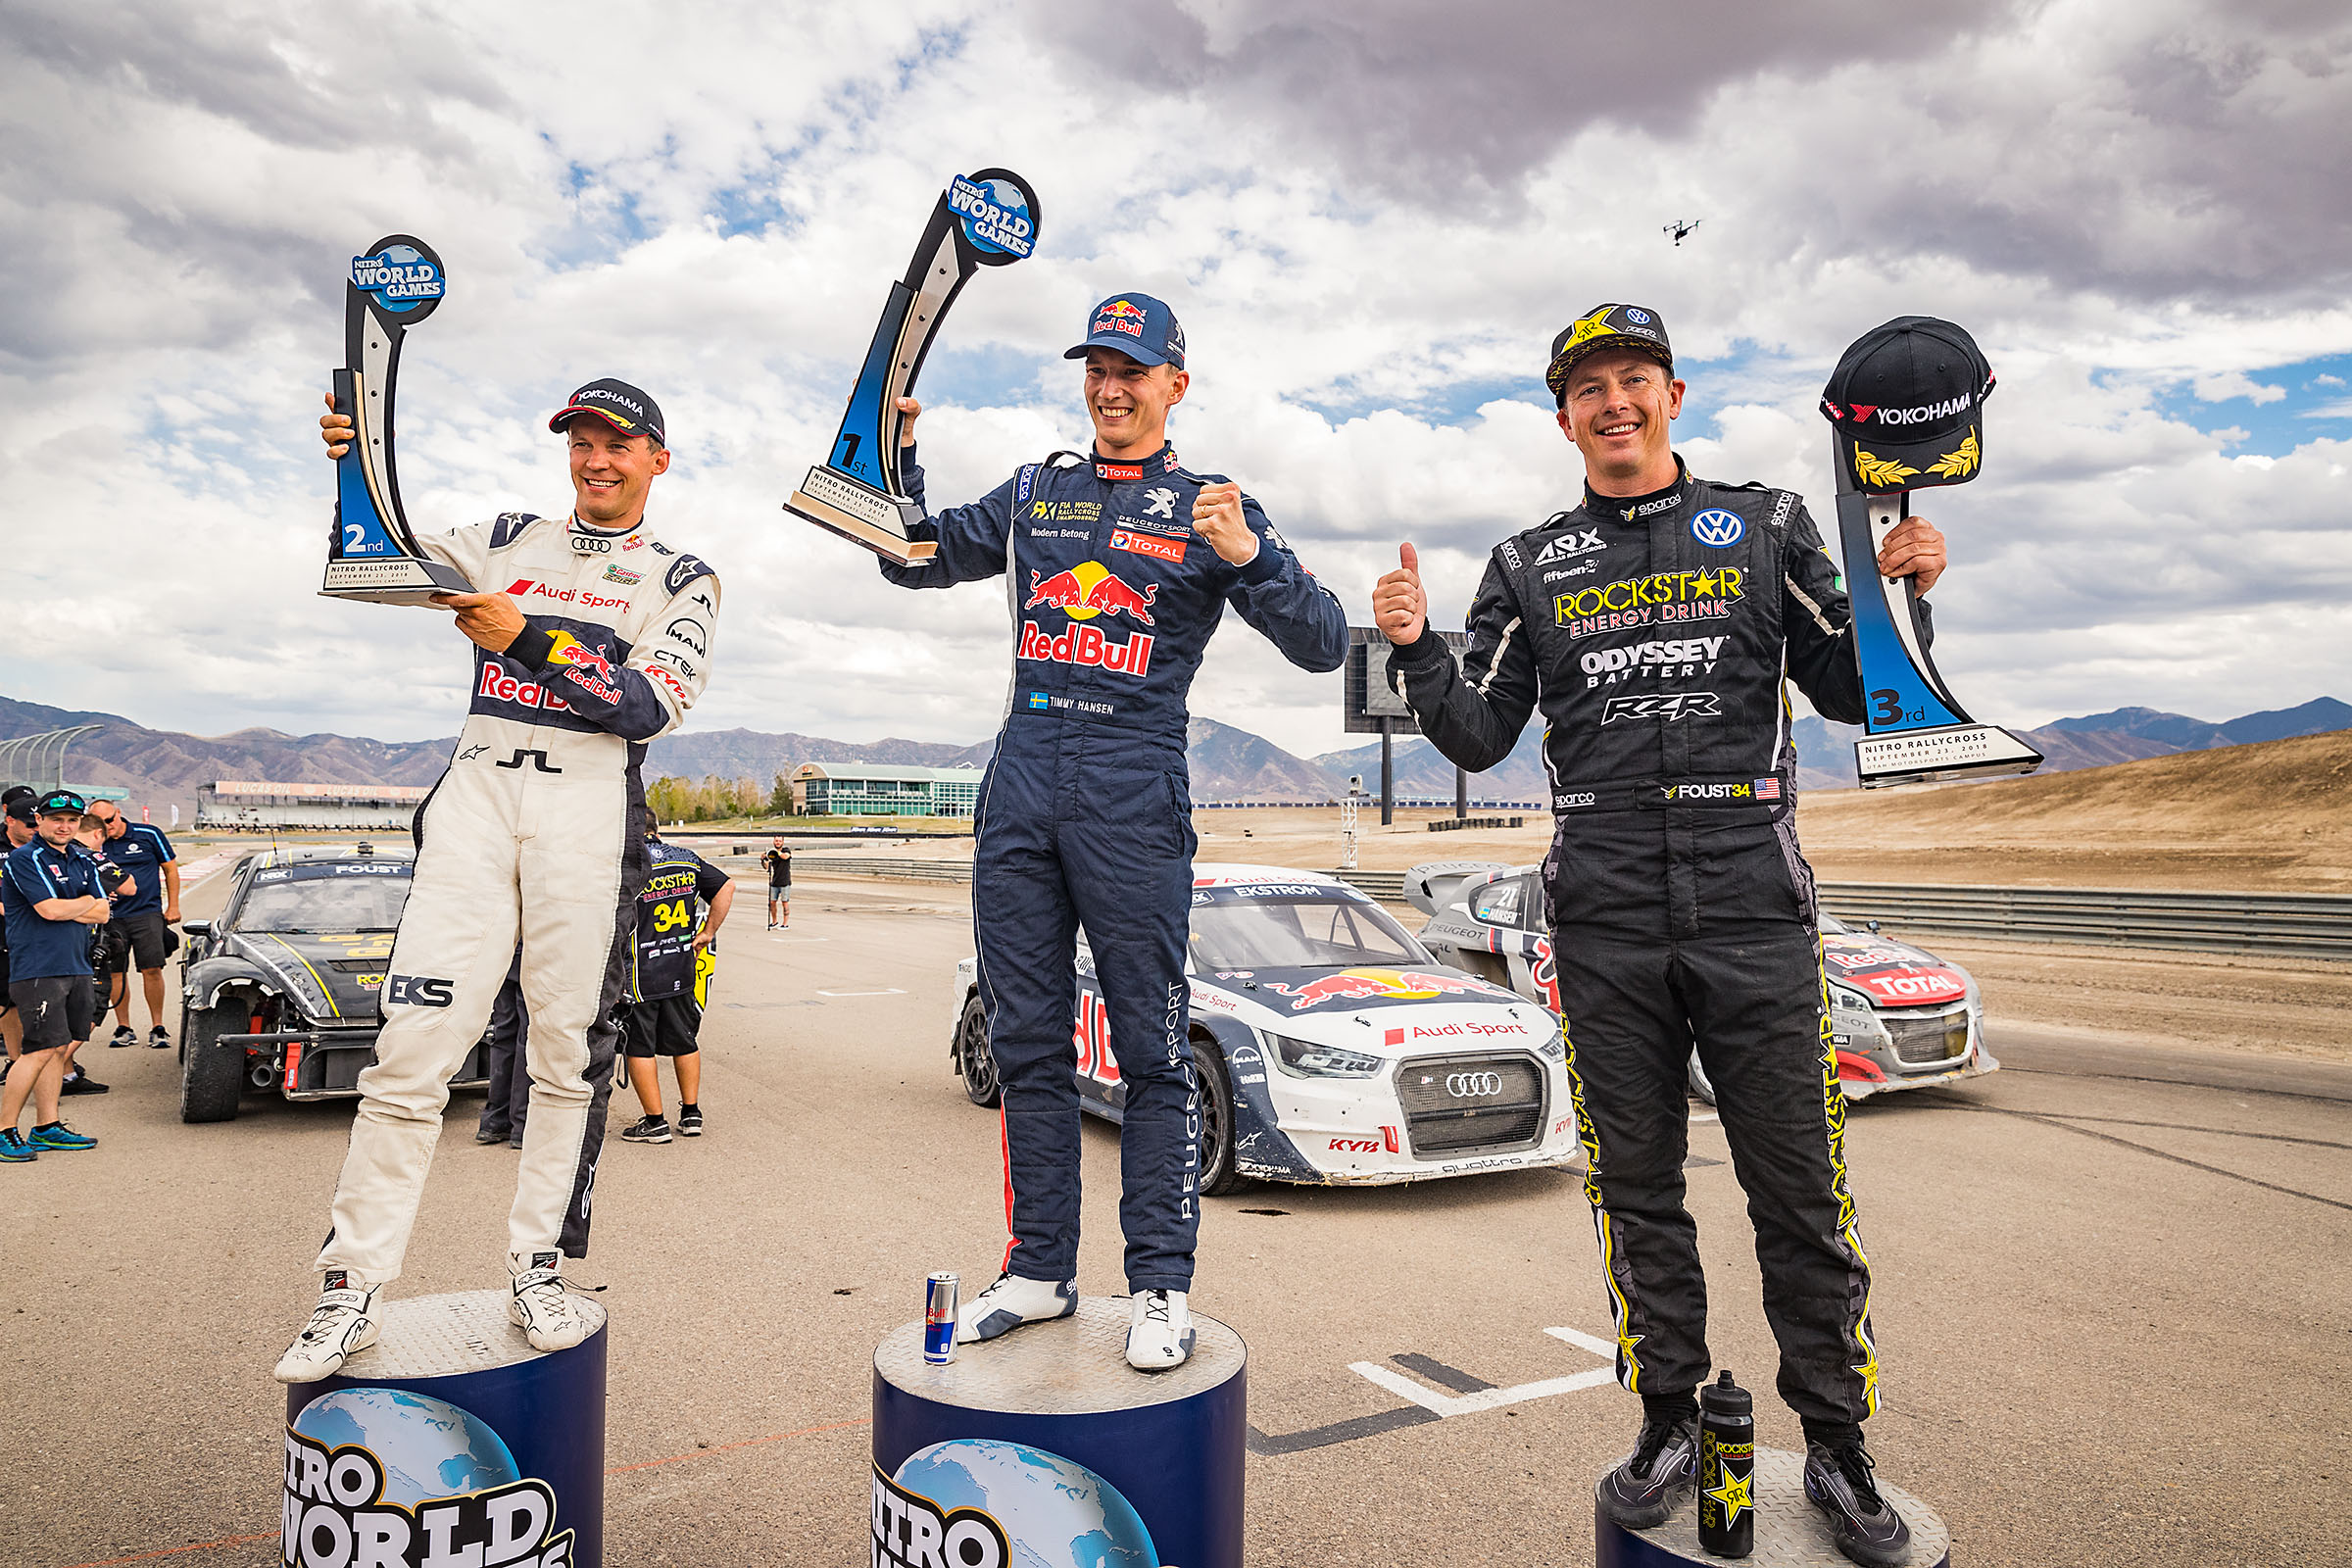 The Nitro Rallycross field for 2019 has been announced for the Nitro World Games, which is happening at Utah Motorsports Campus on Saturday, August 17, 2019.